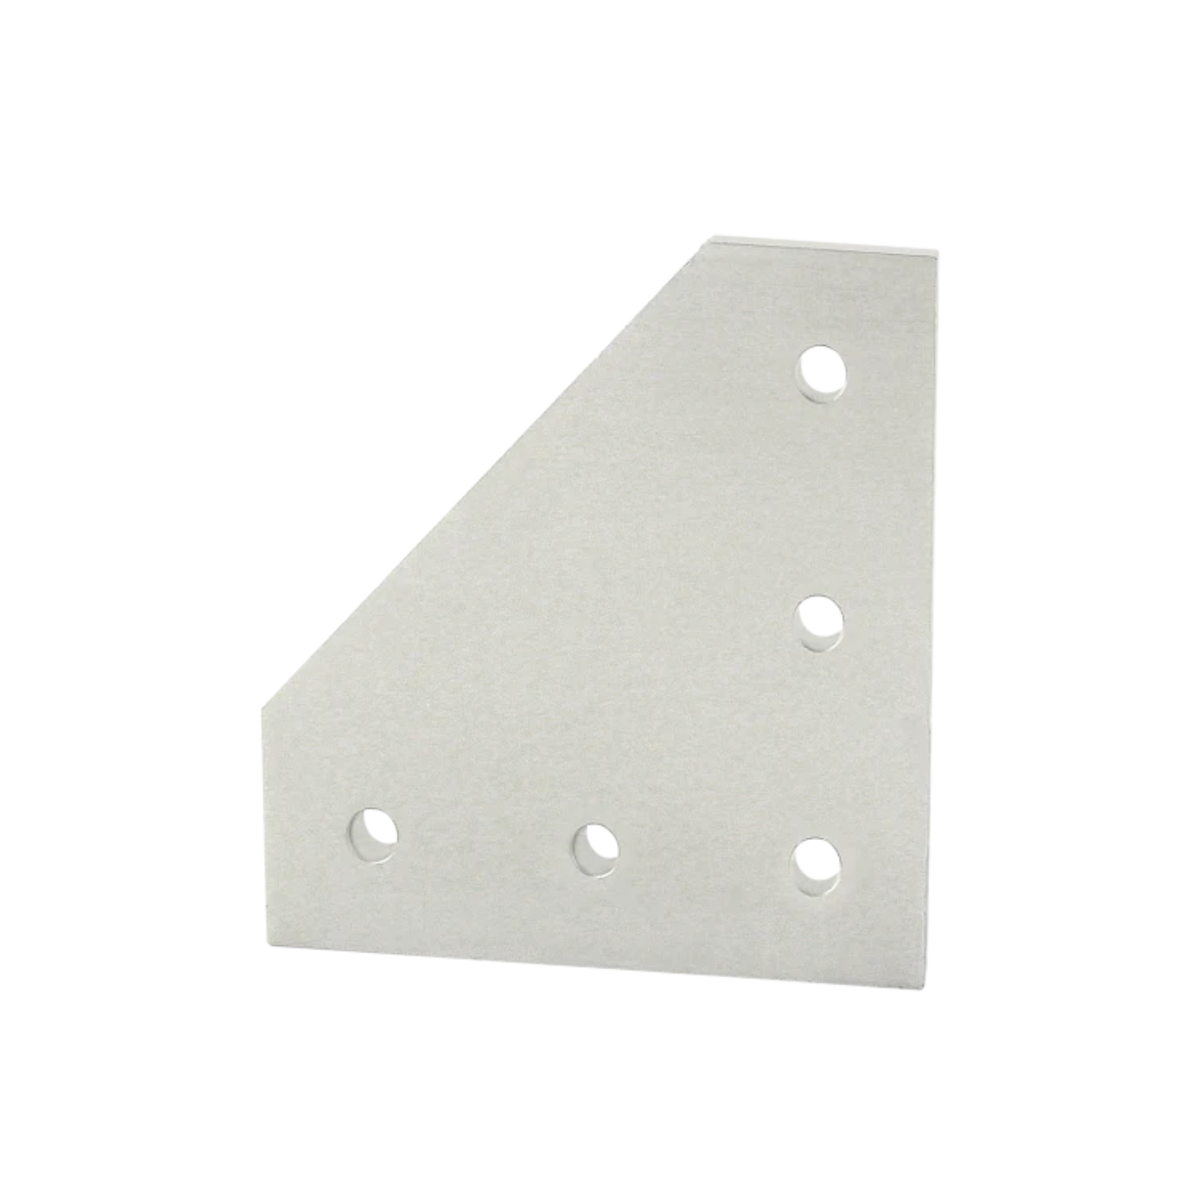 white rectangular flat plate with an angled corner on the top left and five mounting holes